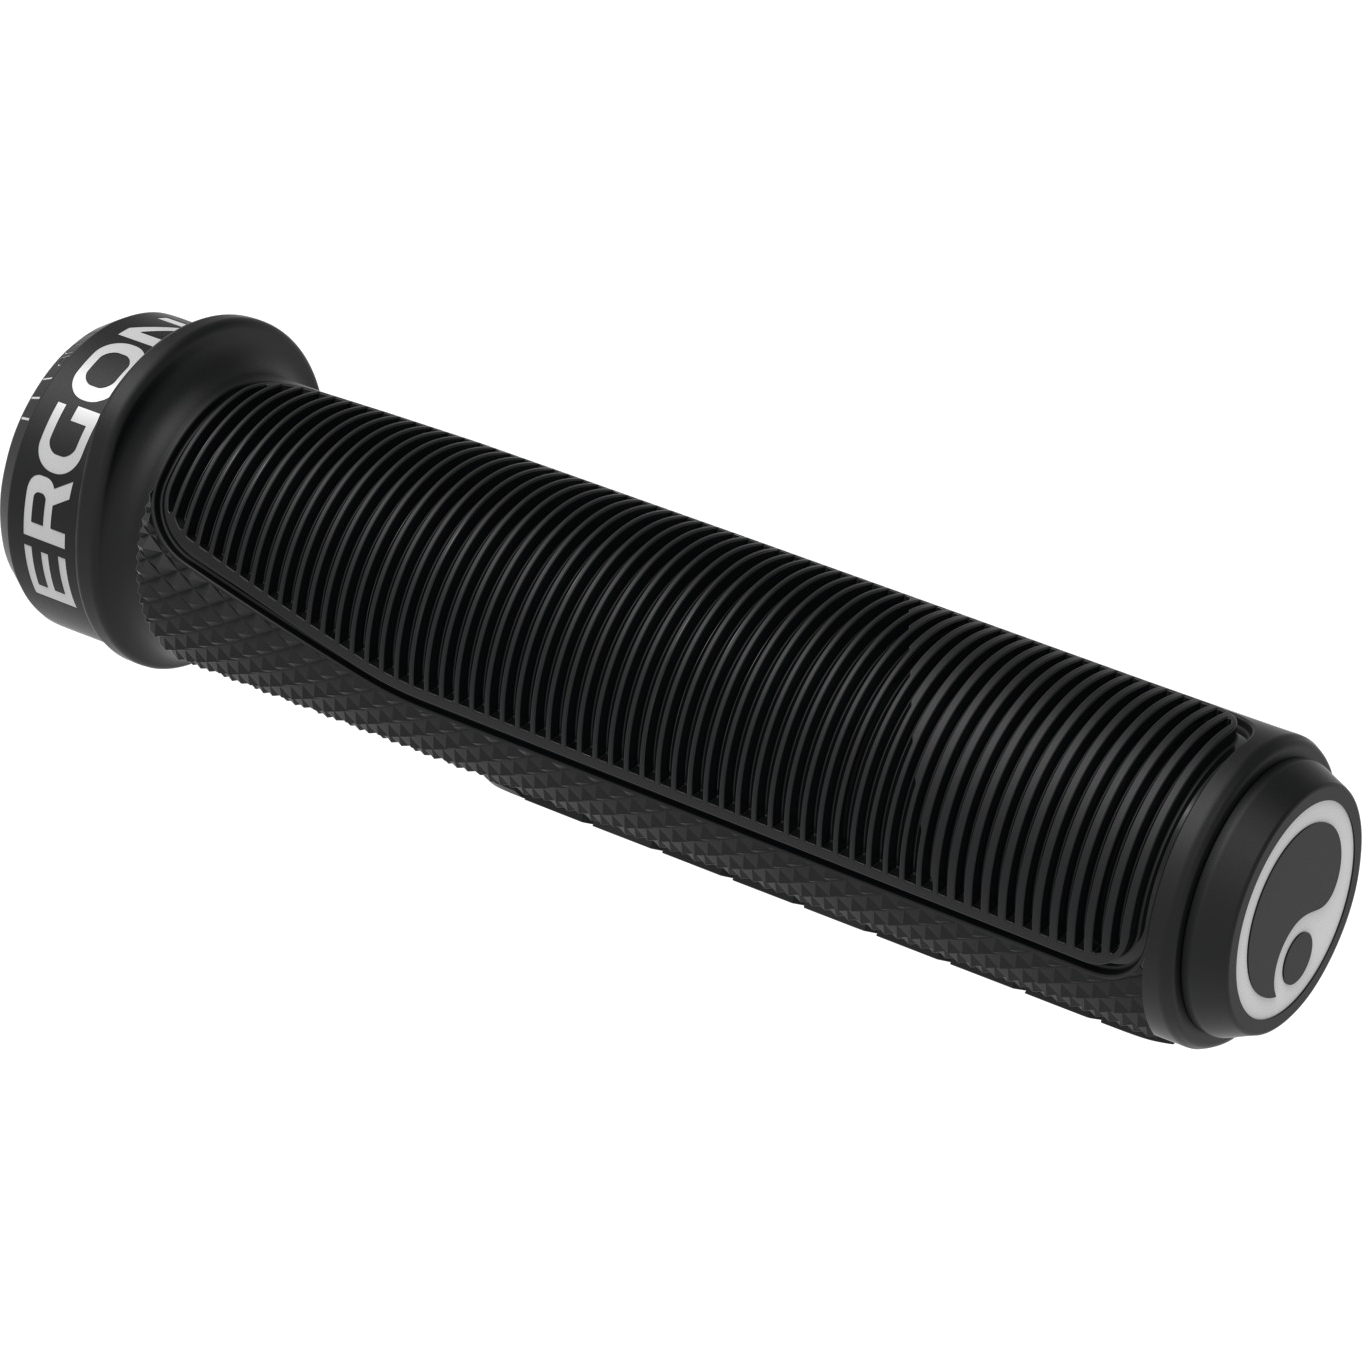 Picture of Ergon GFR1 Grips - black